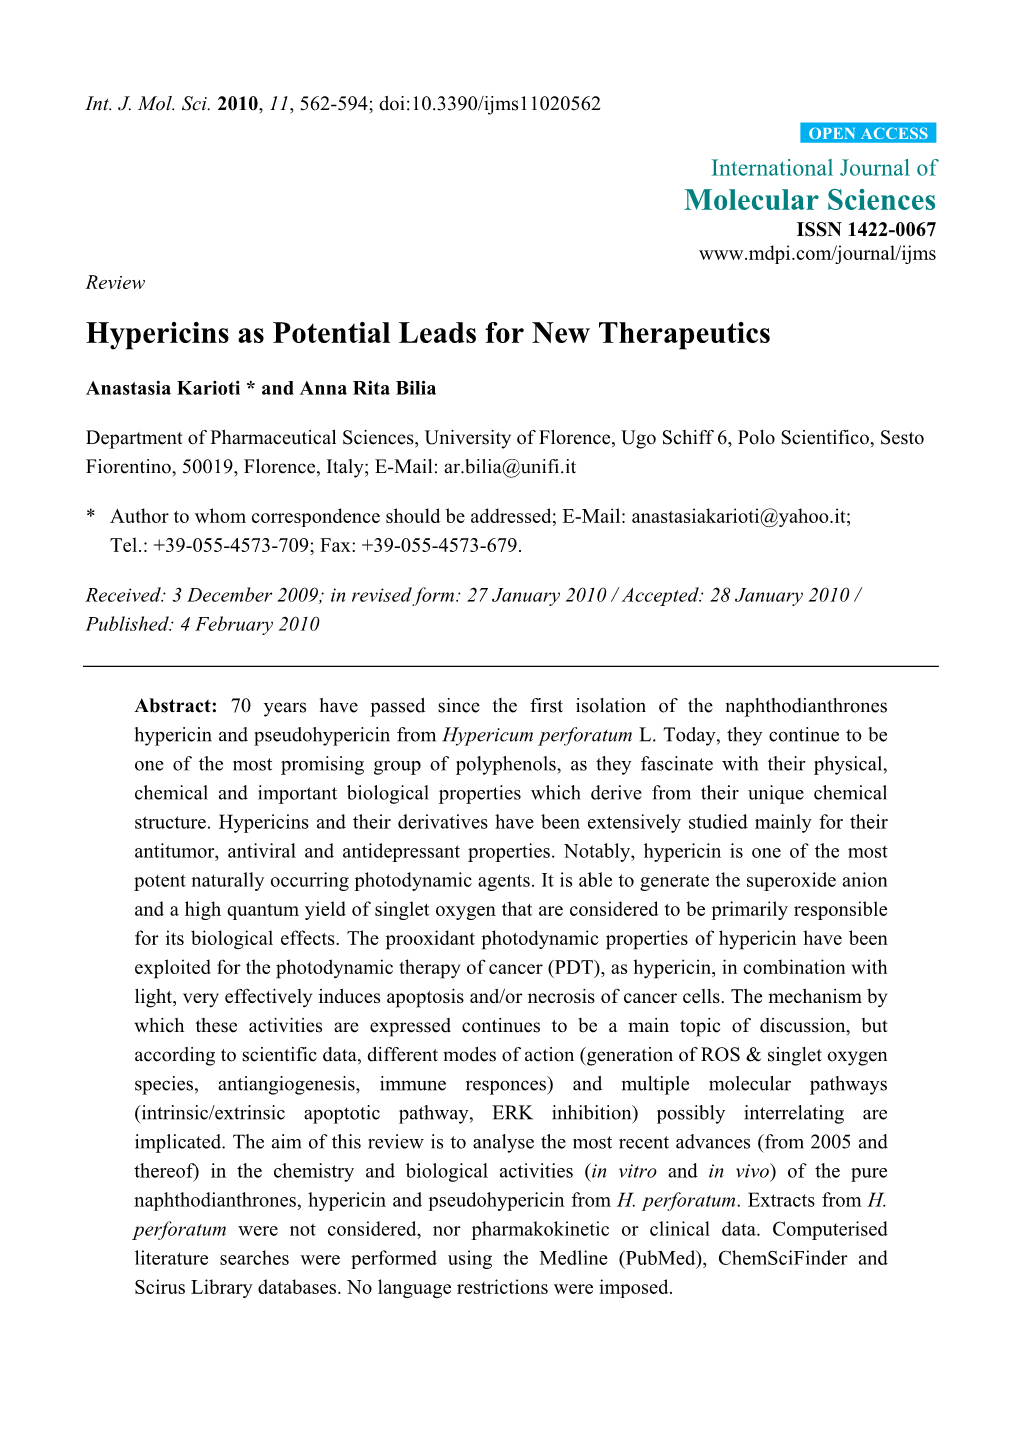 Hypericins As Potential Leads for New Therapeutics